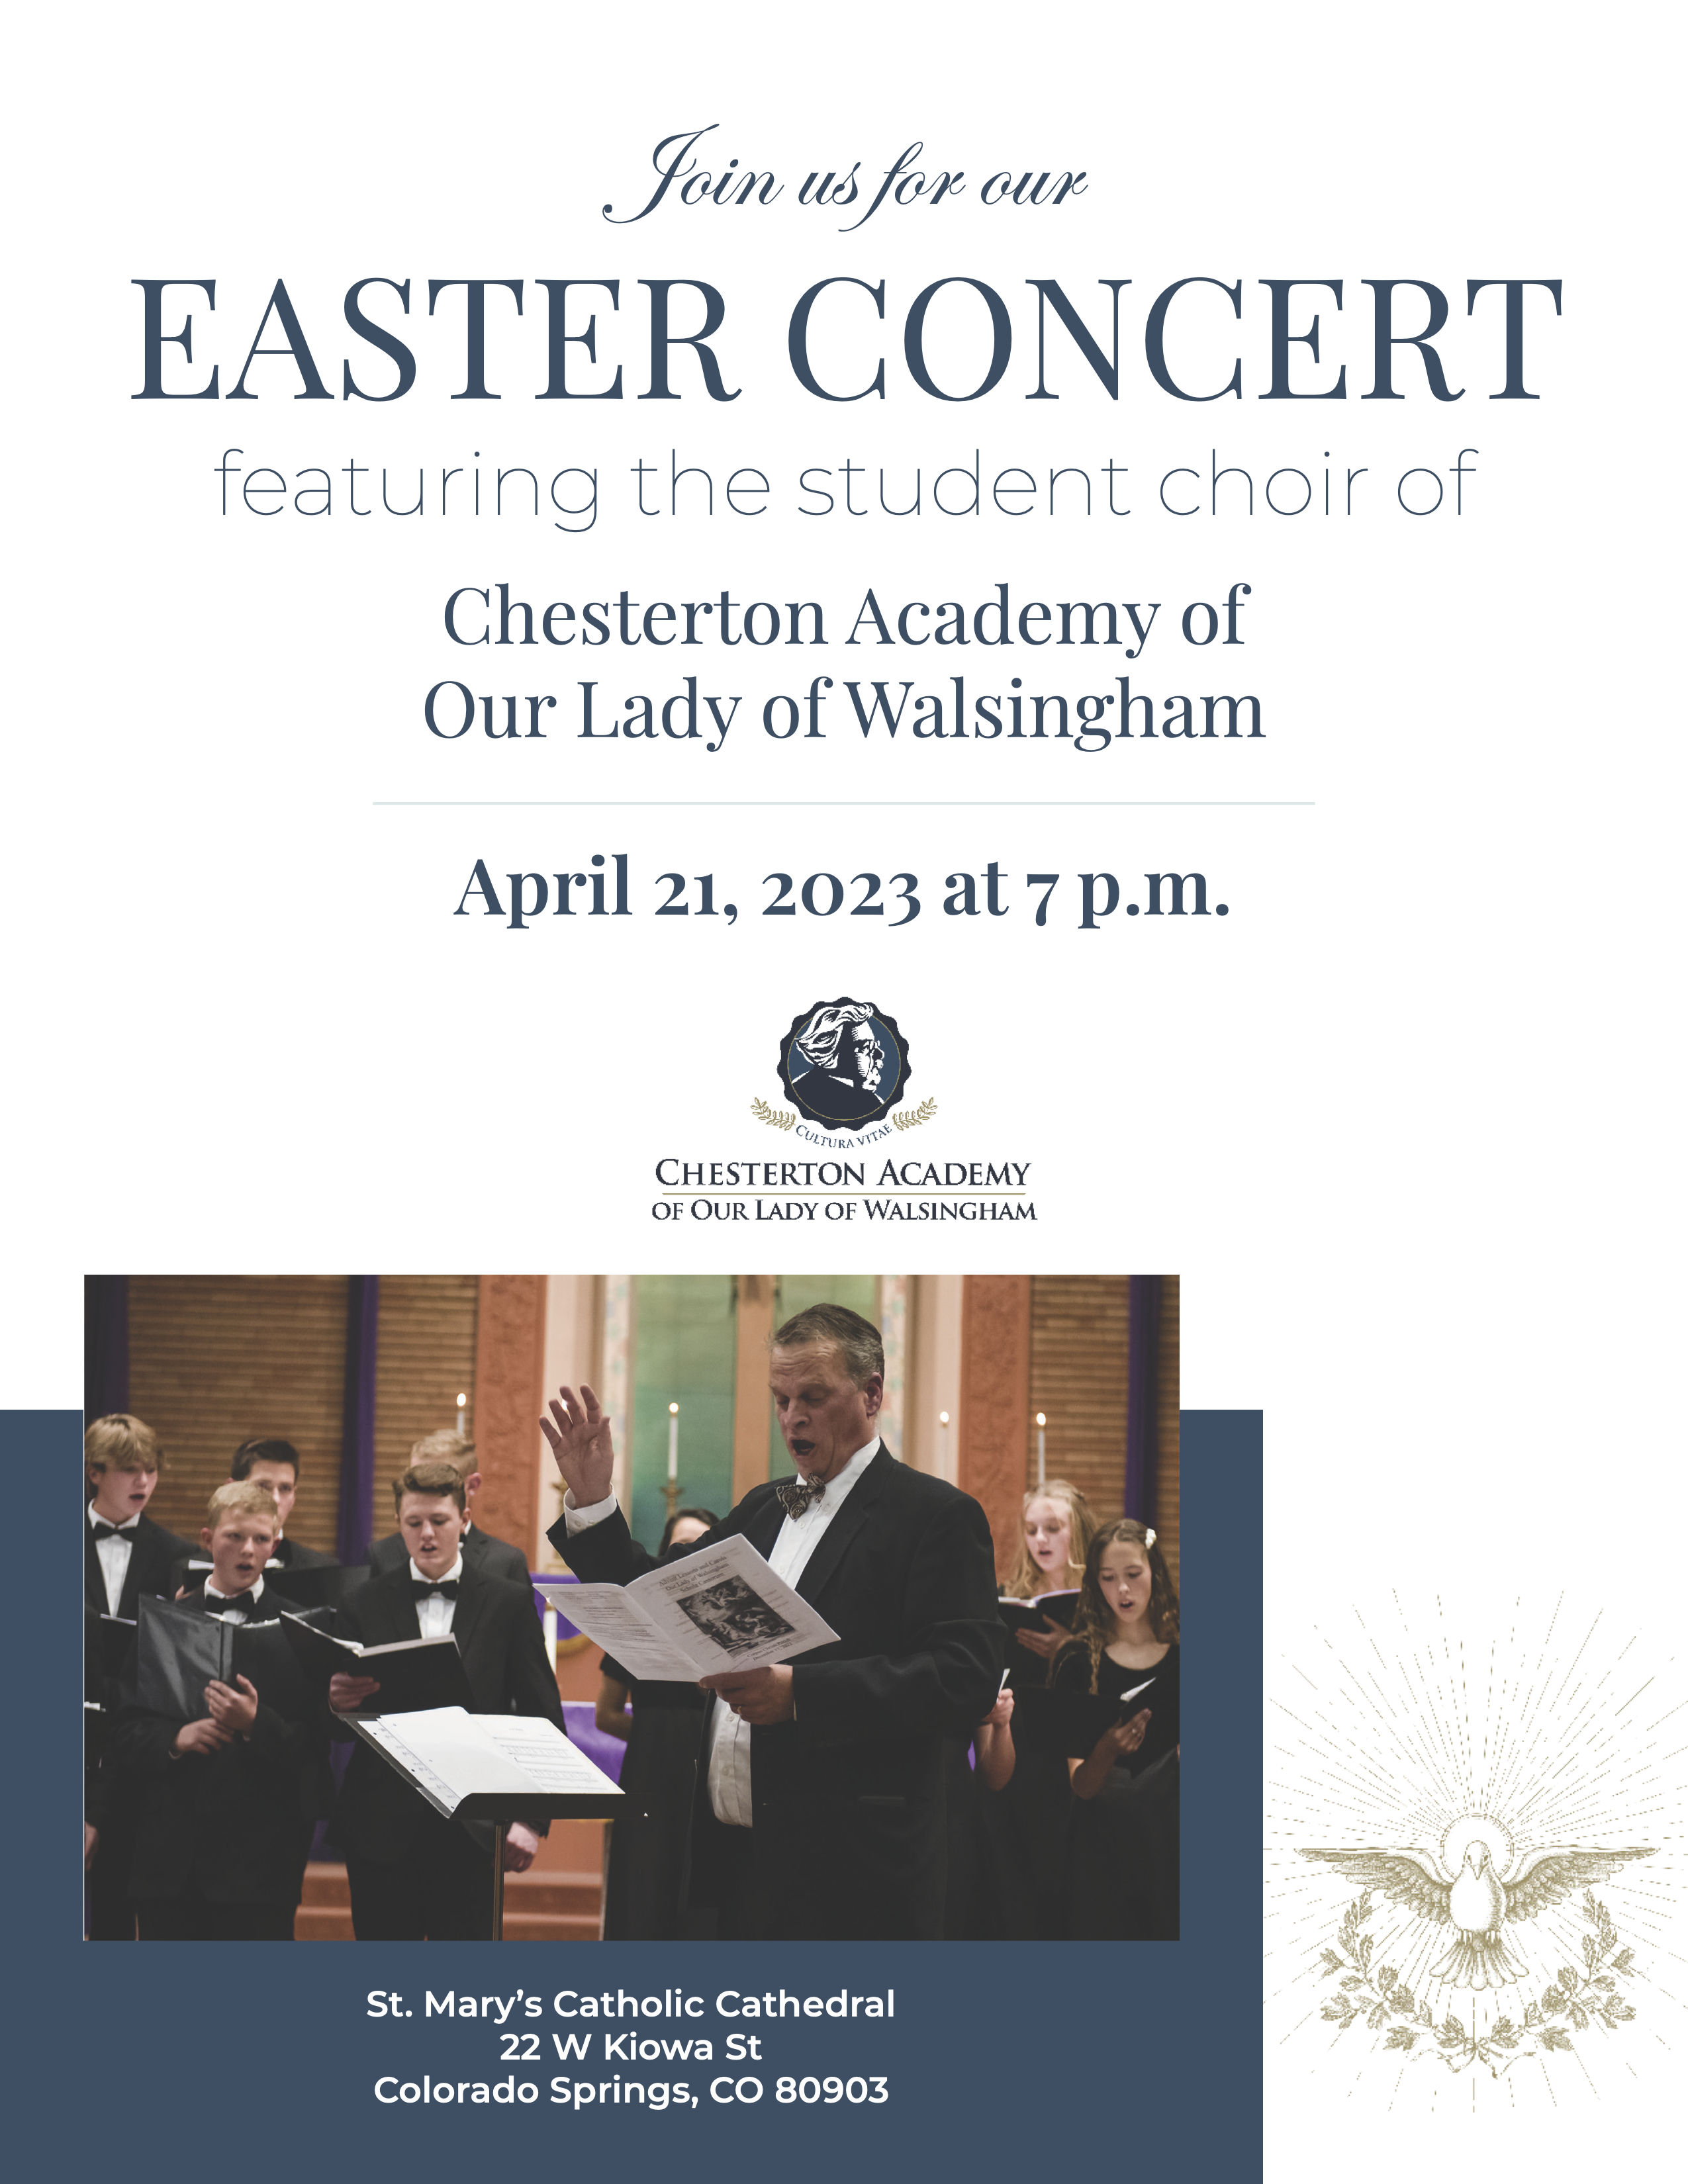 Easter Concert featuring the Student Choir of Chesterton Academy of Our Lady of Walsingham